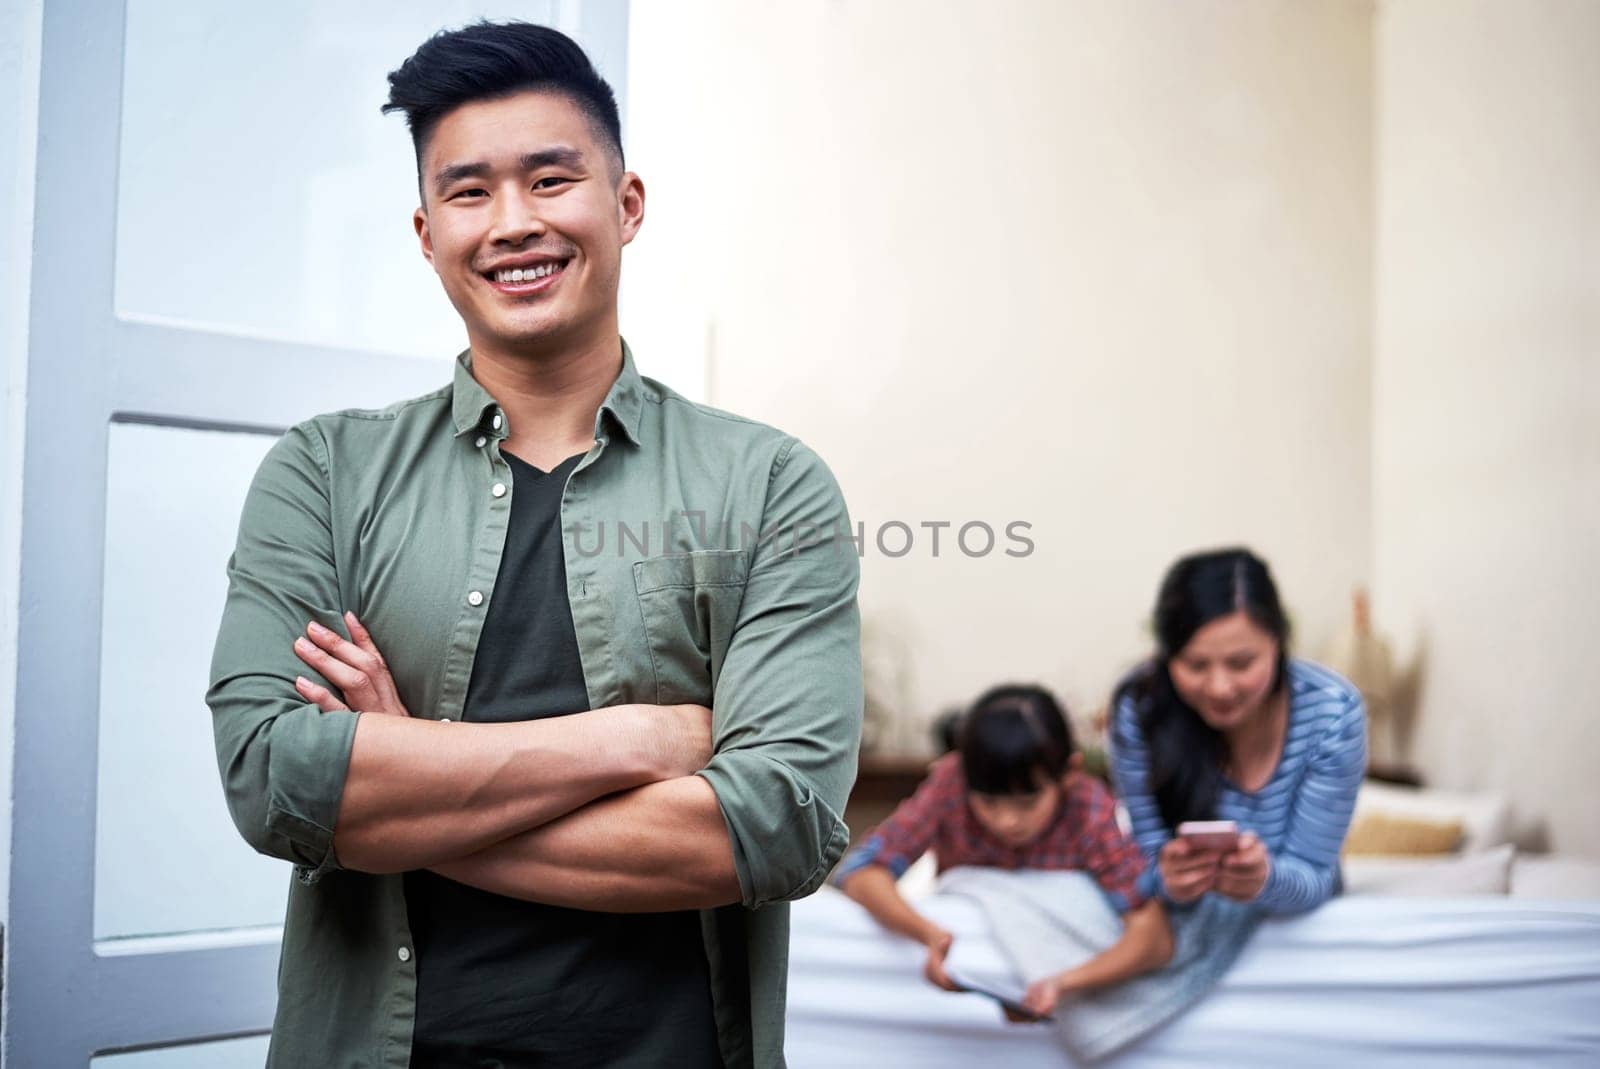 Family time is important. Portrait of a young man relaxing with his family at home